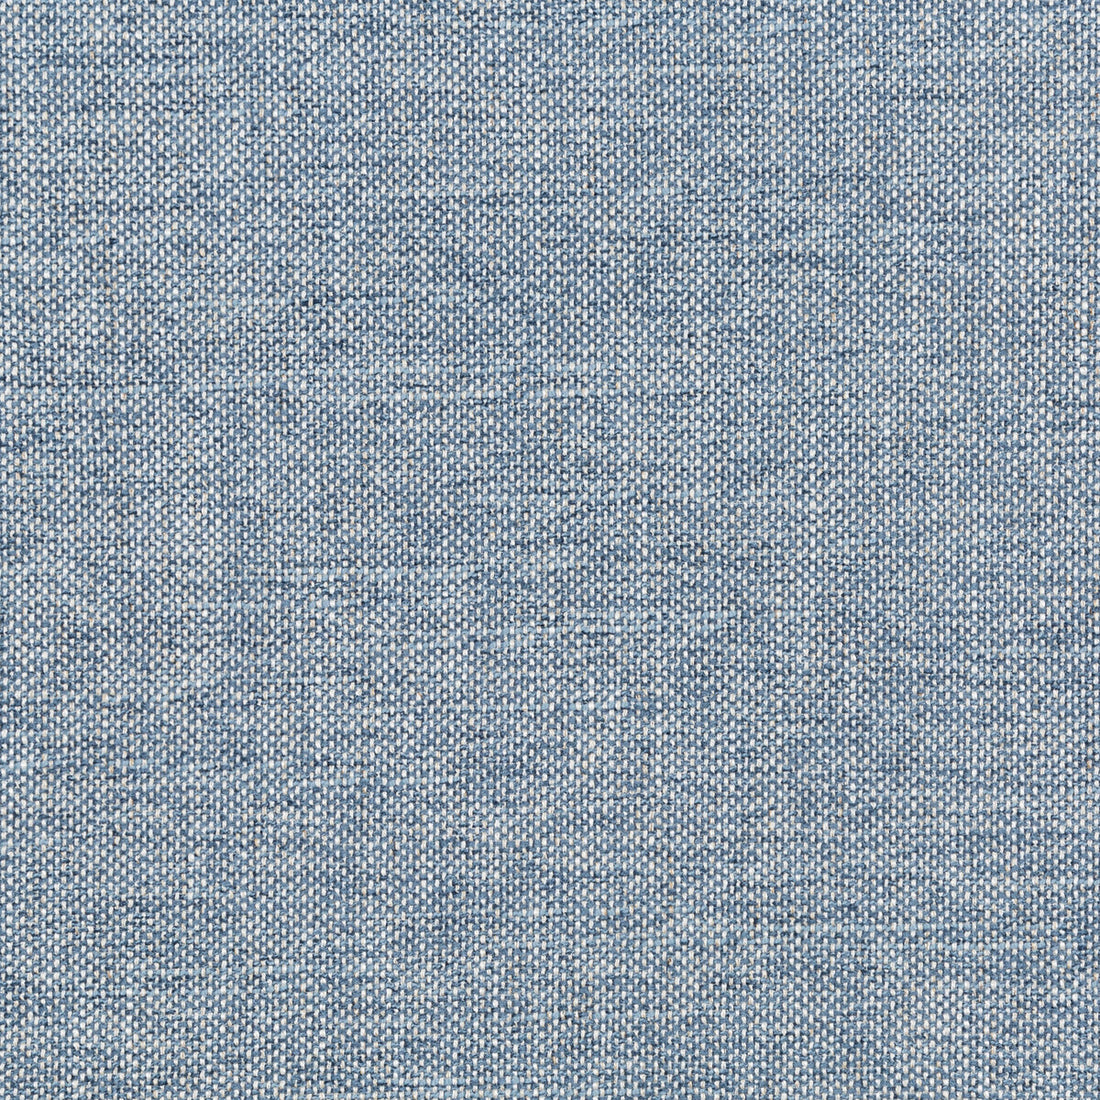 Kravet Smart fabric in 35989-15 color - pattern 35989.15.0 - by Kravet Smart in the Performance Crypton Home collection